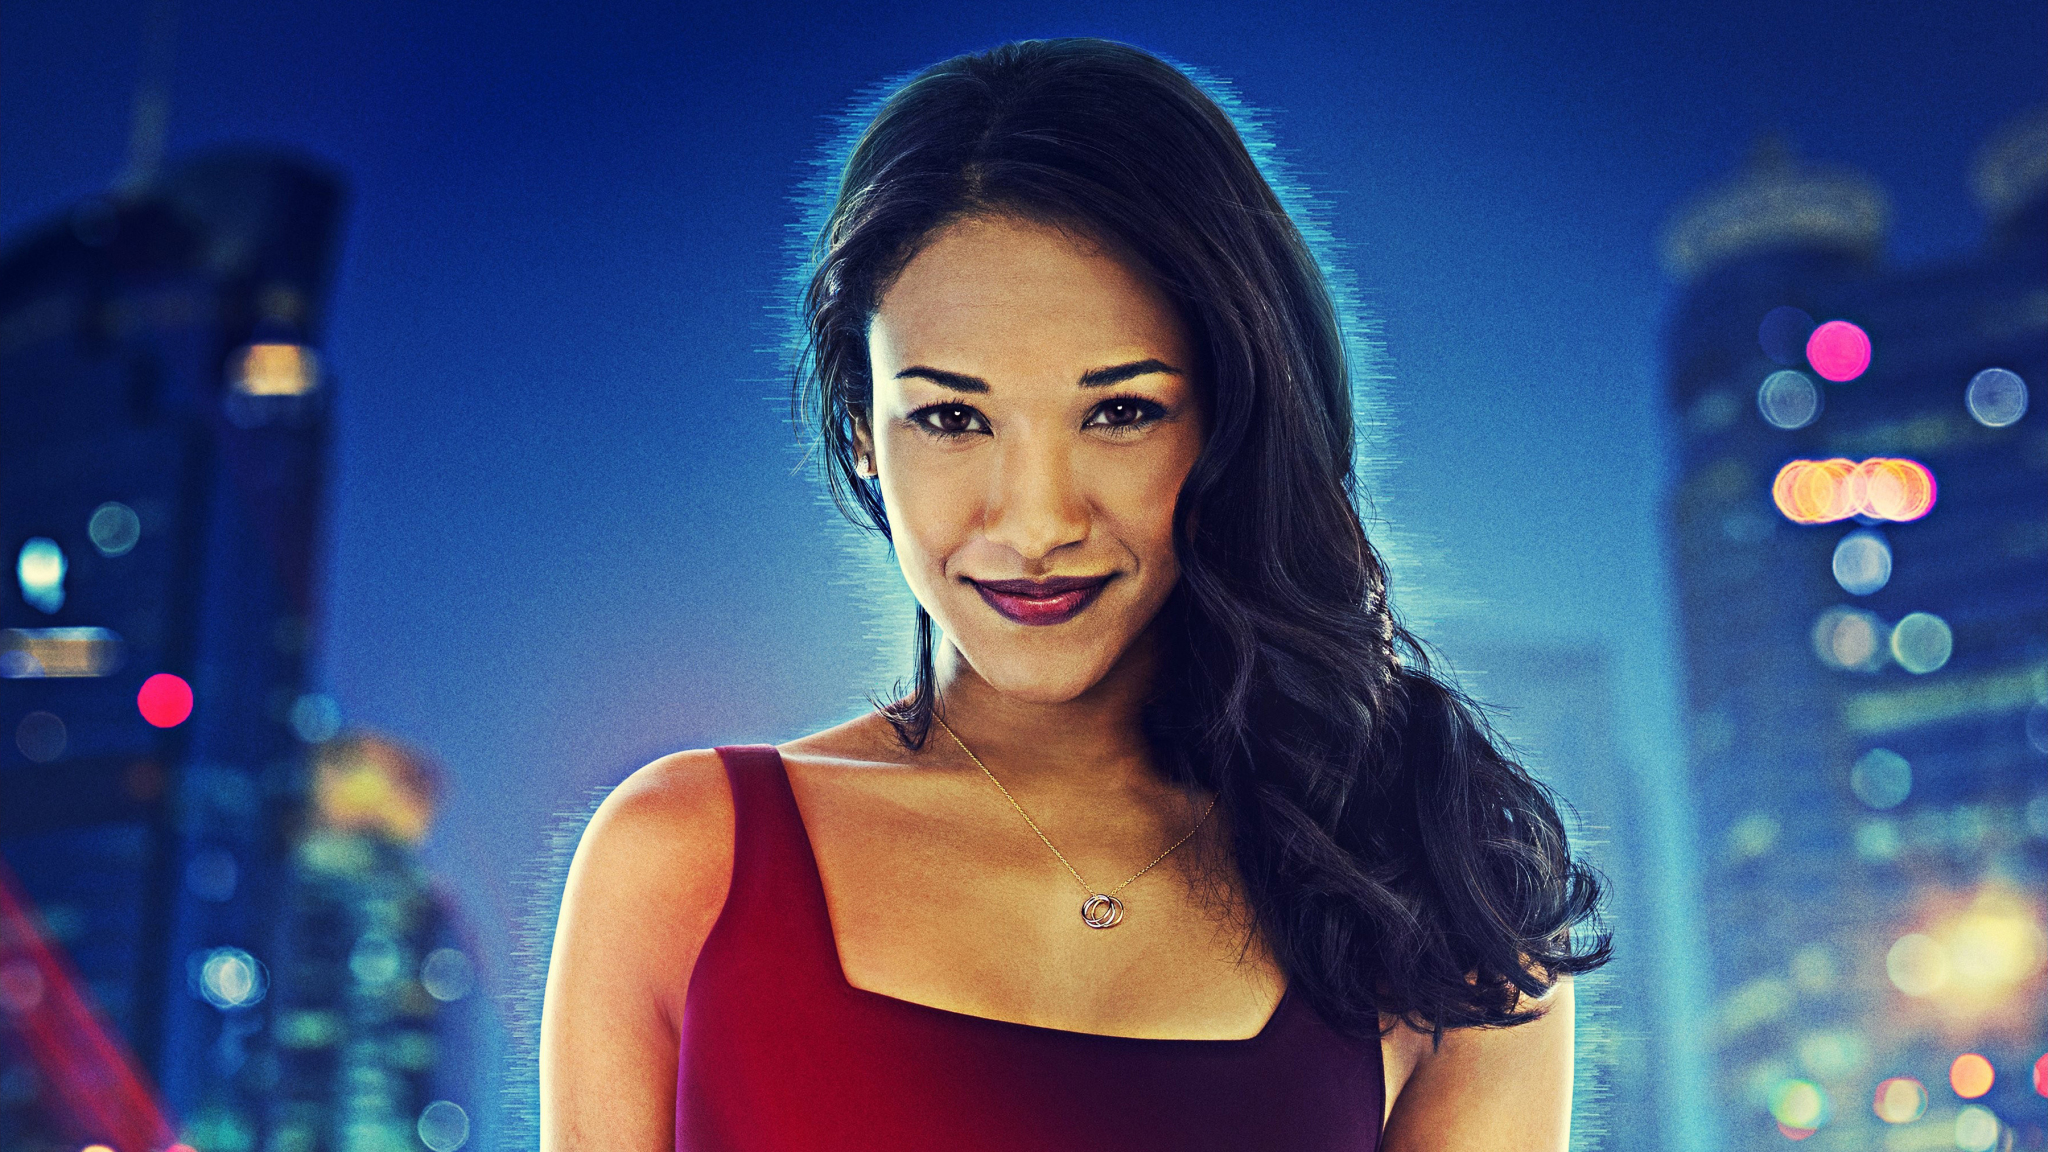 Candice Patton 2019 Wallpapers